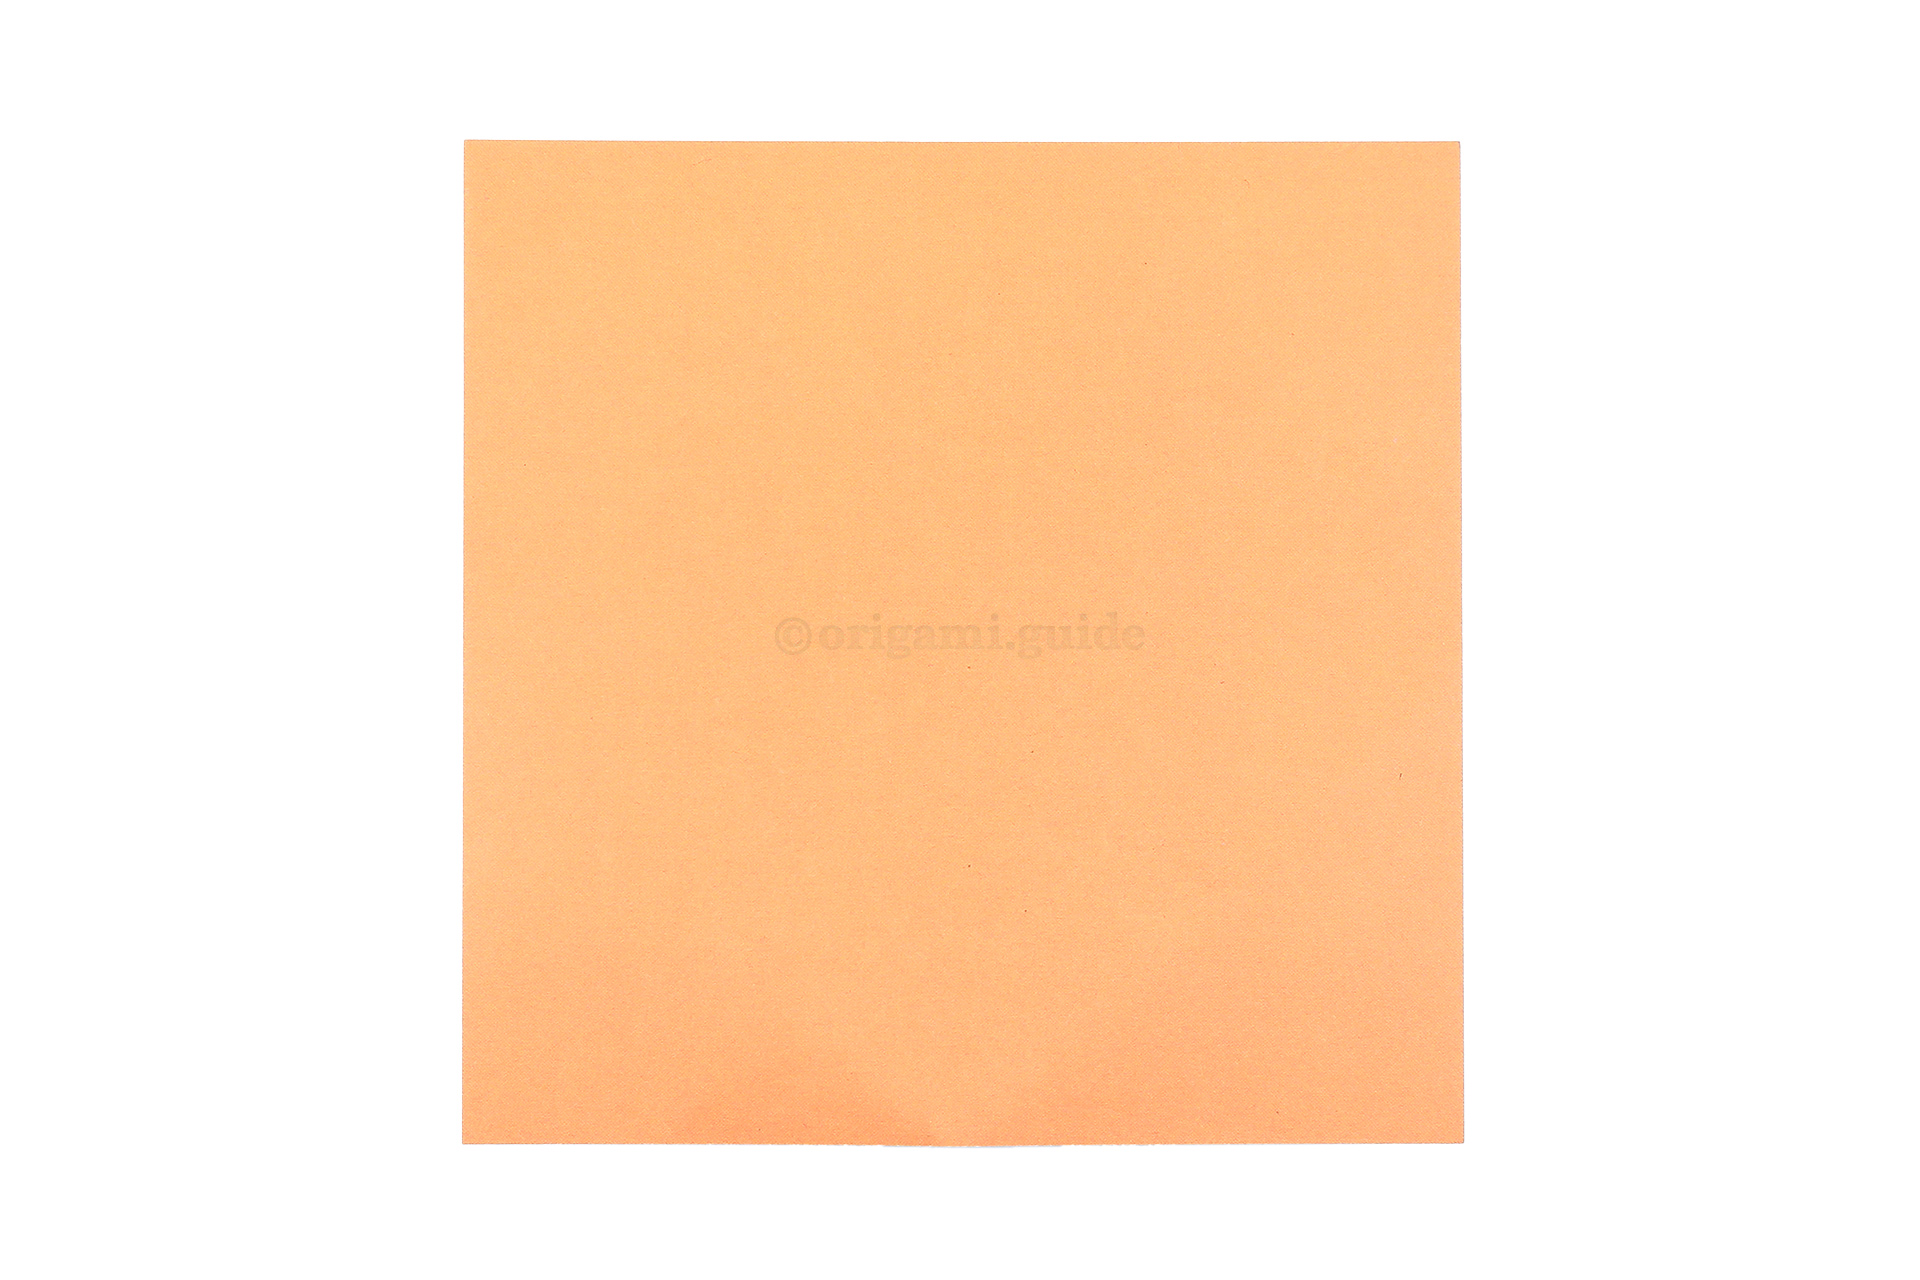 This is the back of our origami paper, this colour will become the shape of the cross.